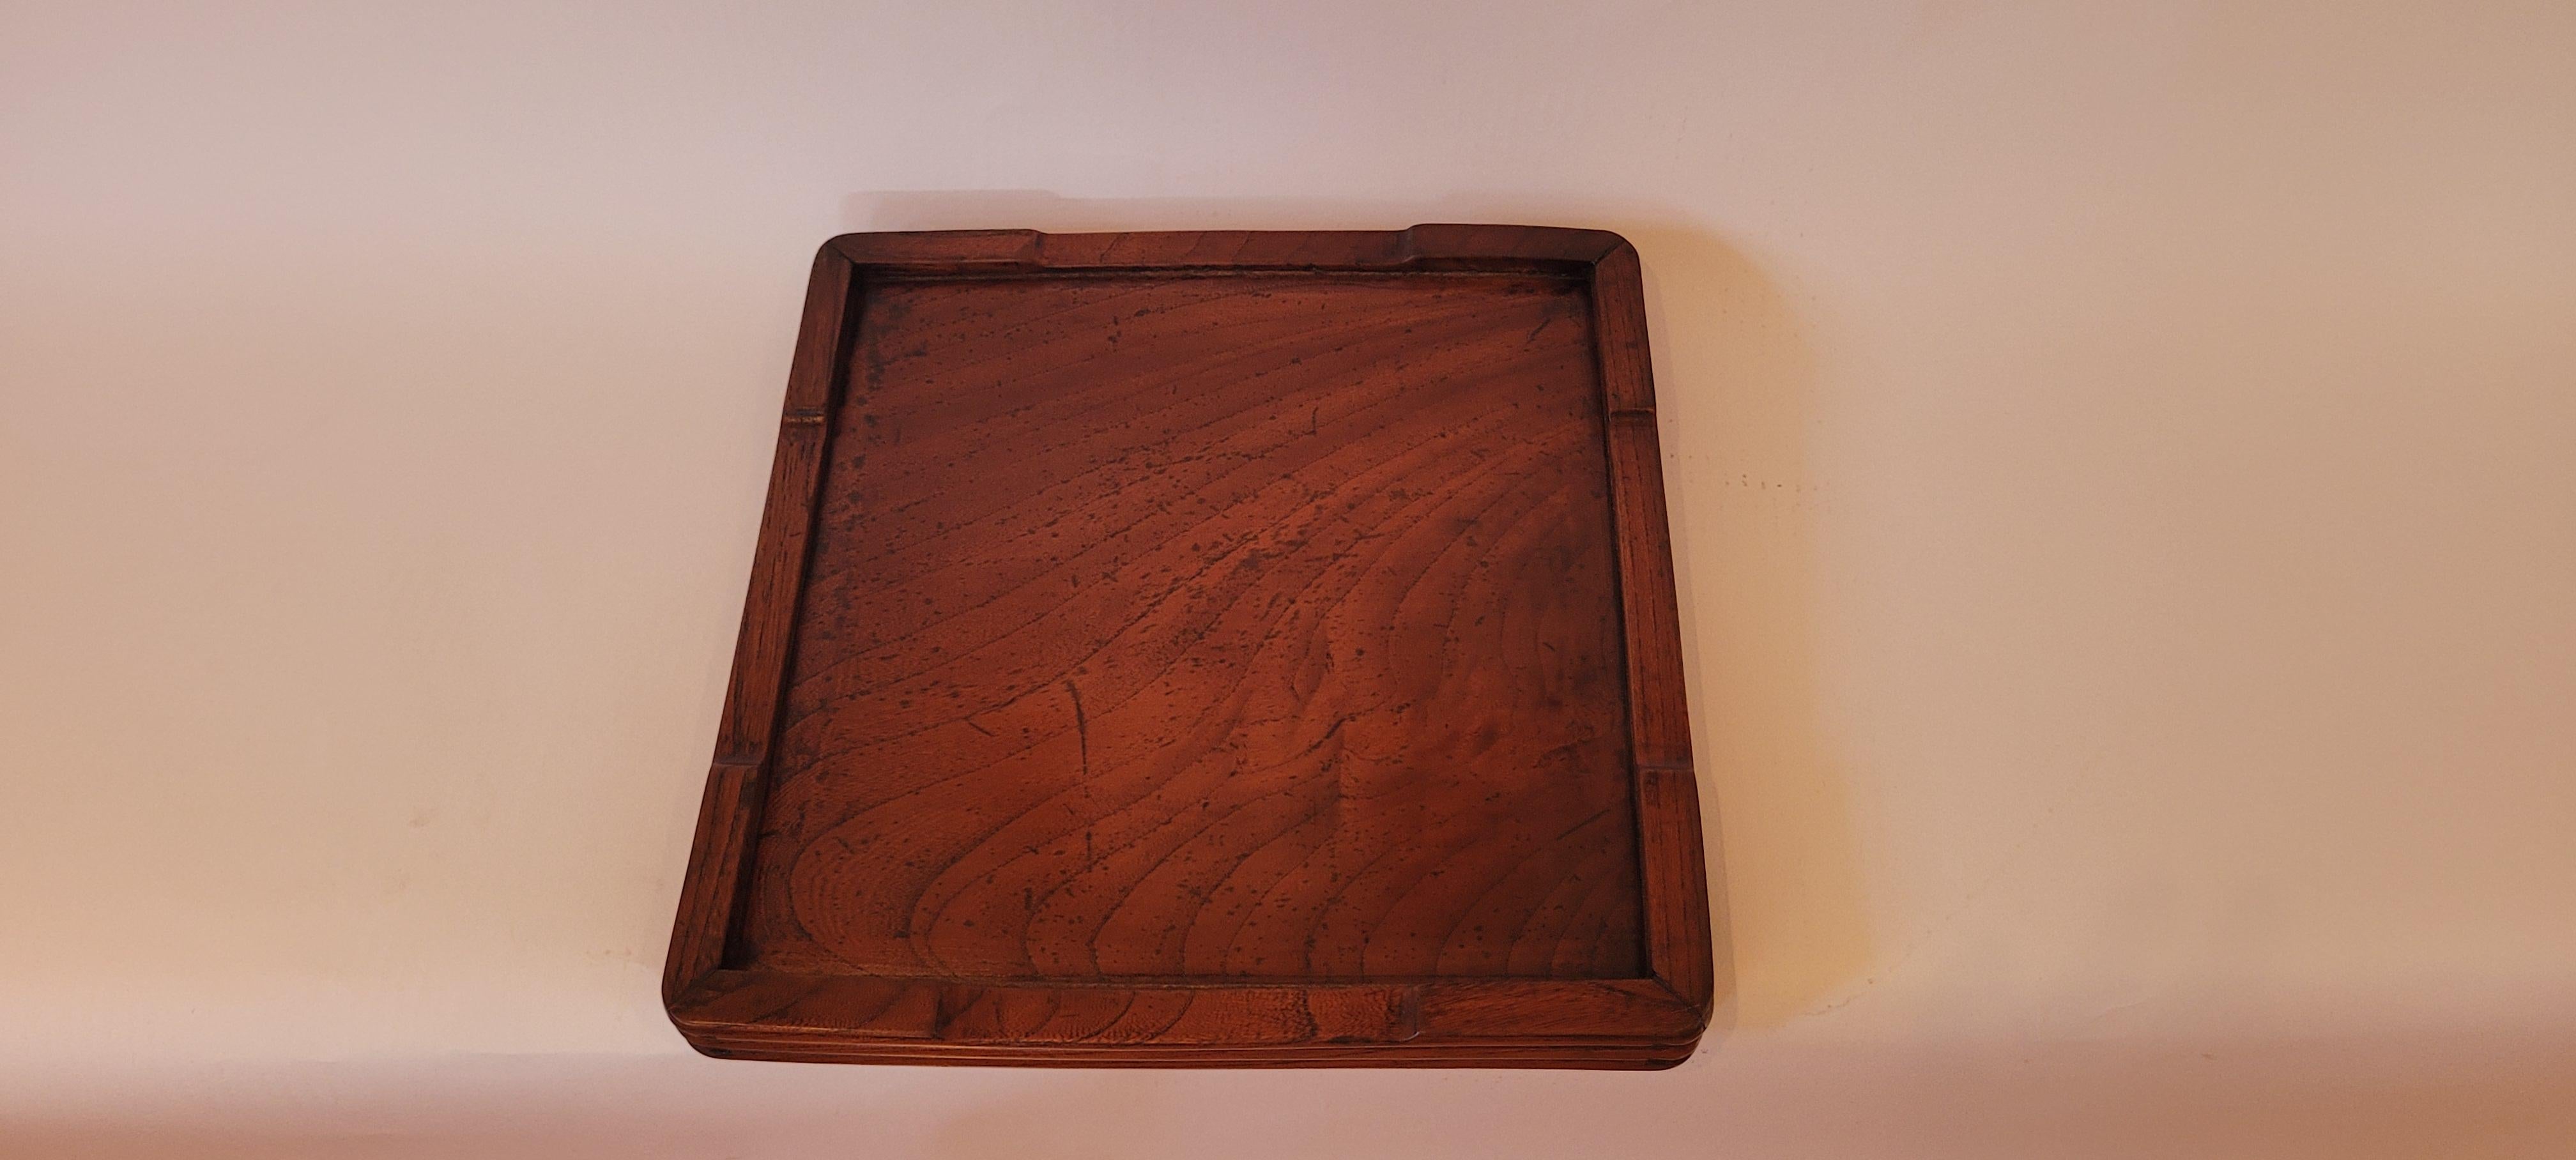 Late 19th Century Tea Tray For Sale 3